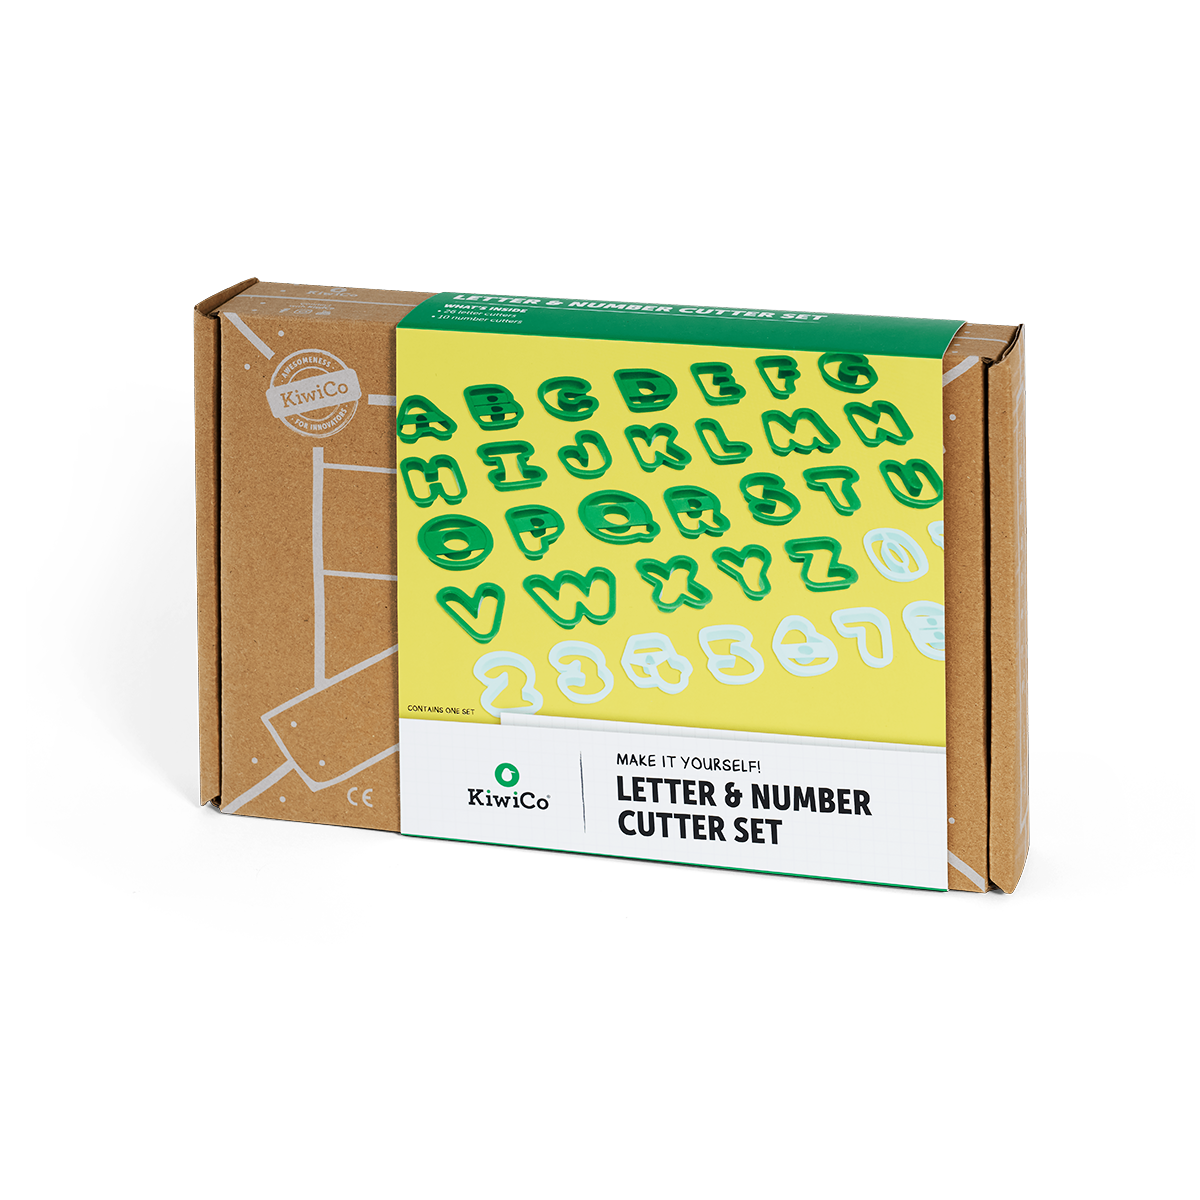 letter-and-number-cutter-set-kiwico